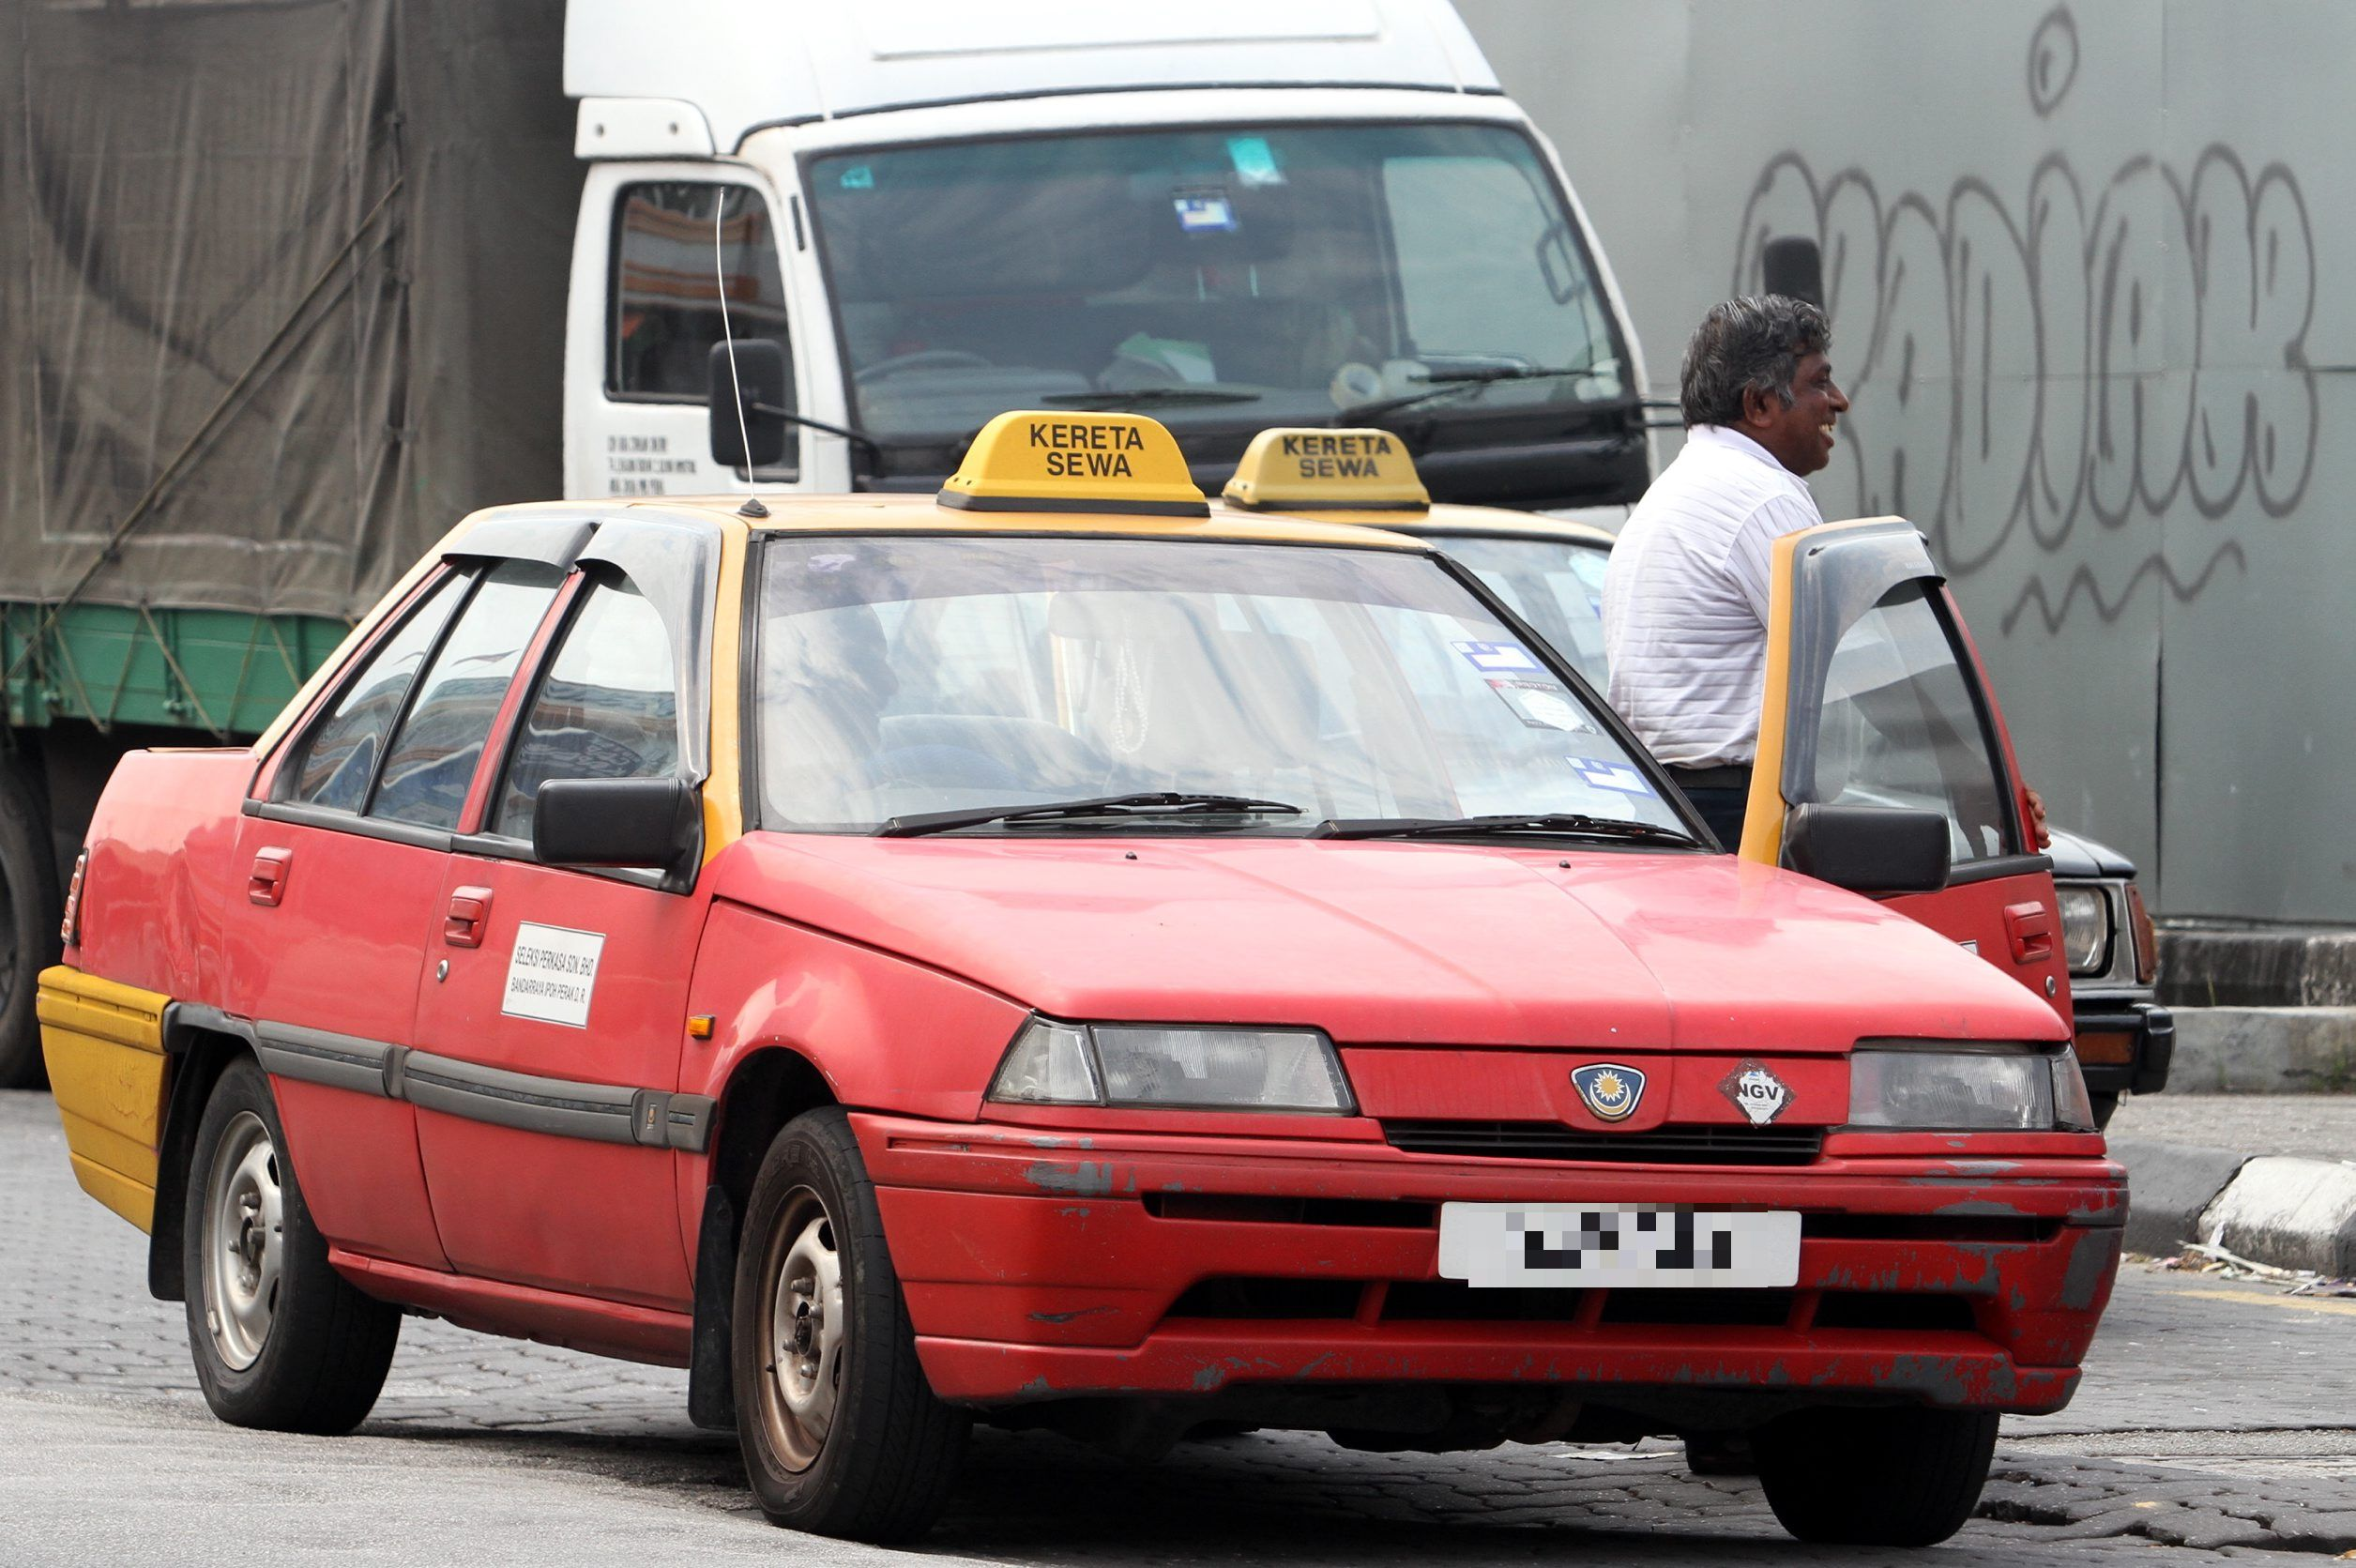 2 m'sian men rob taxi driver rm400 in cash, get arrested by police 4 hours later | weirdkaya